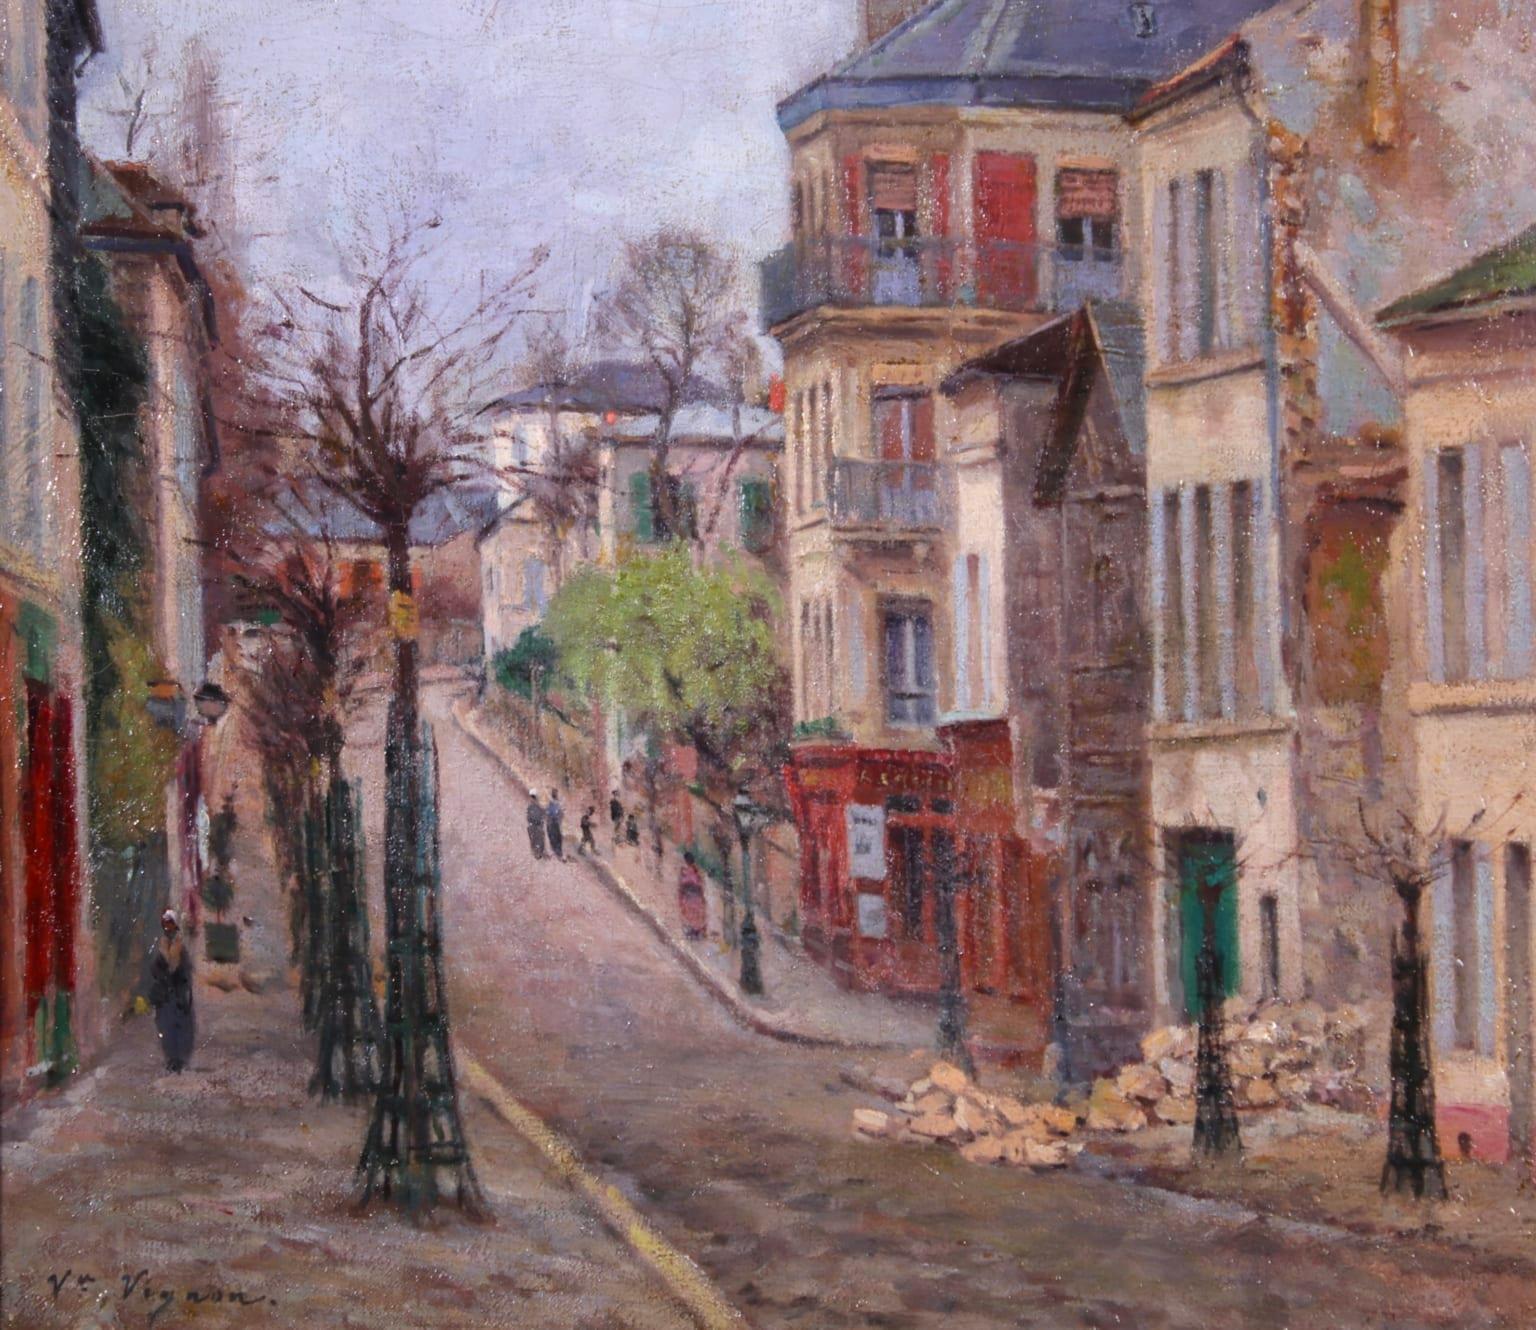 A charming oil on canvas circa 1880 by French Impressionist painter Victor Alfred Paul Vignon depicting figures on a street in Montmartre on what looks to be a cool day. To the right there is a pile of rubble from a demolished building.